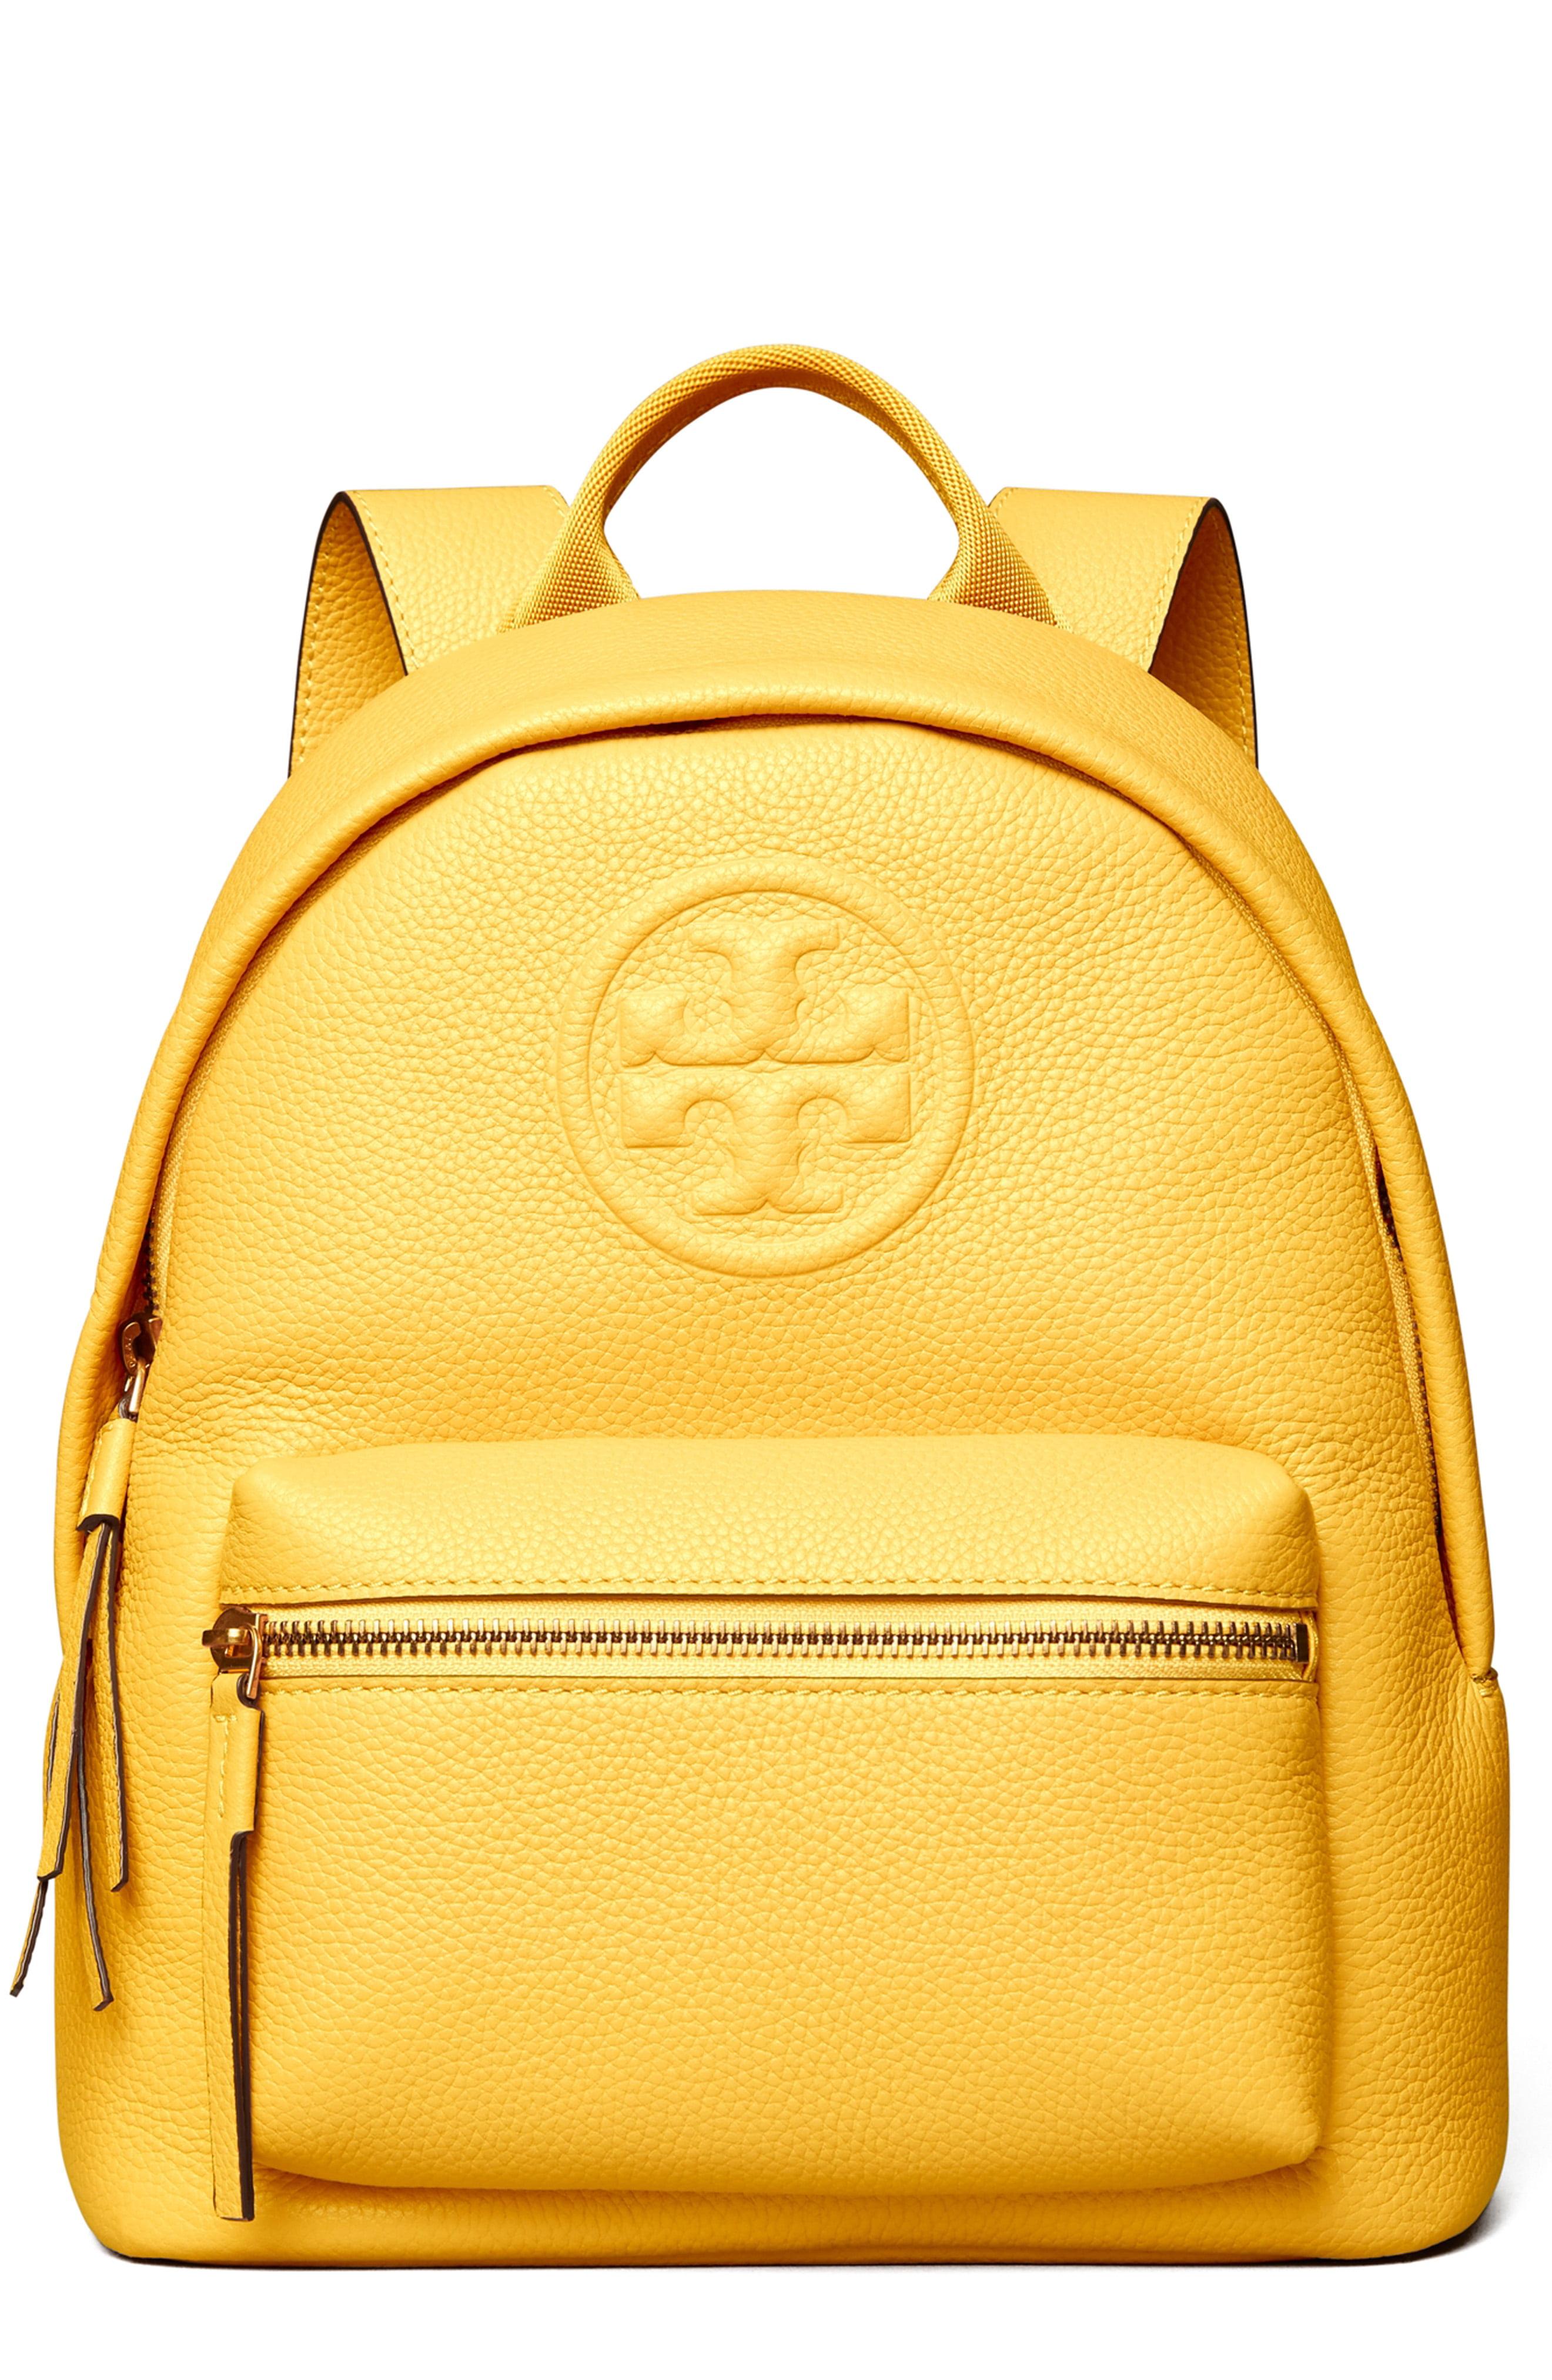 Tory Burch Yellow Backpack Austria, SAVE 41% 